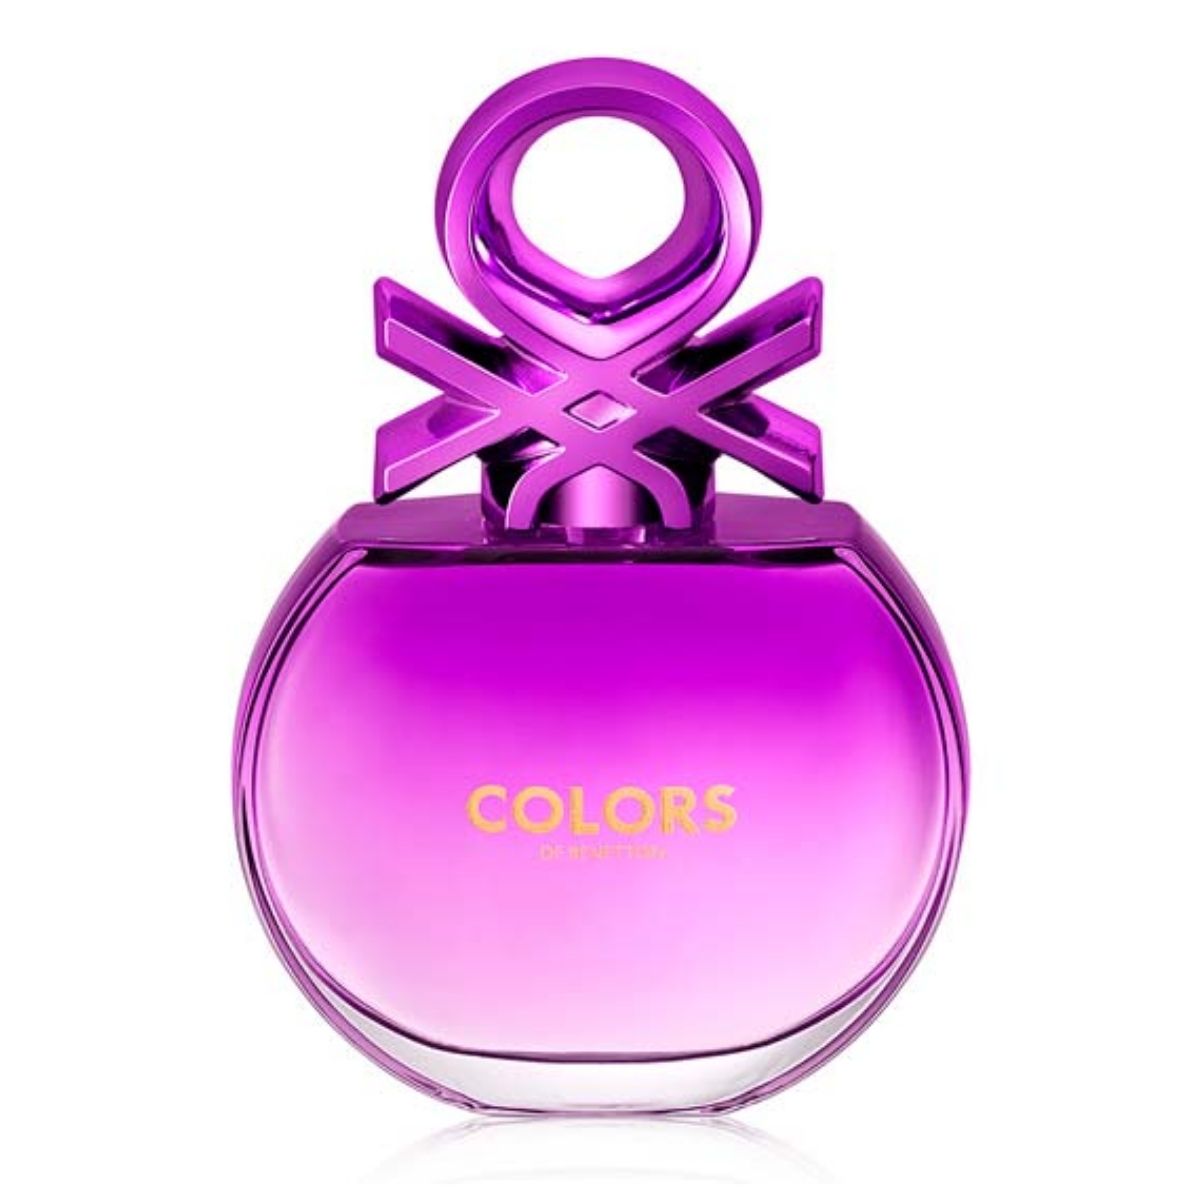 Colors Purple Benetton Edt 80Ml Mujer Tester